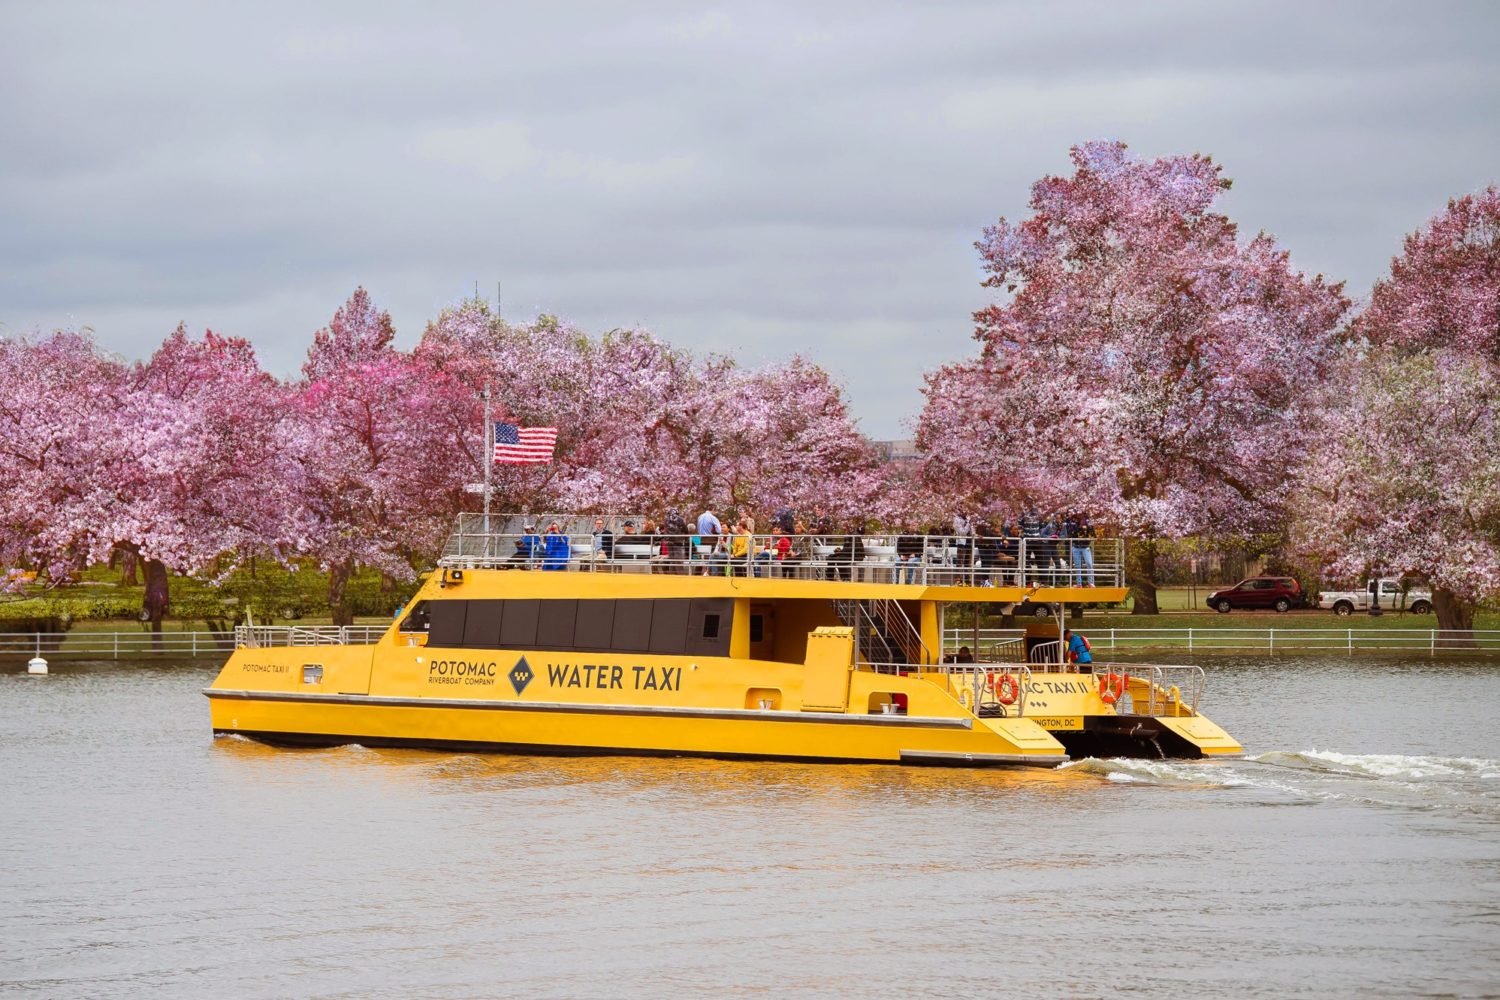 City Experiences's Water Taxi.